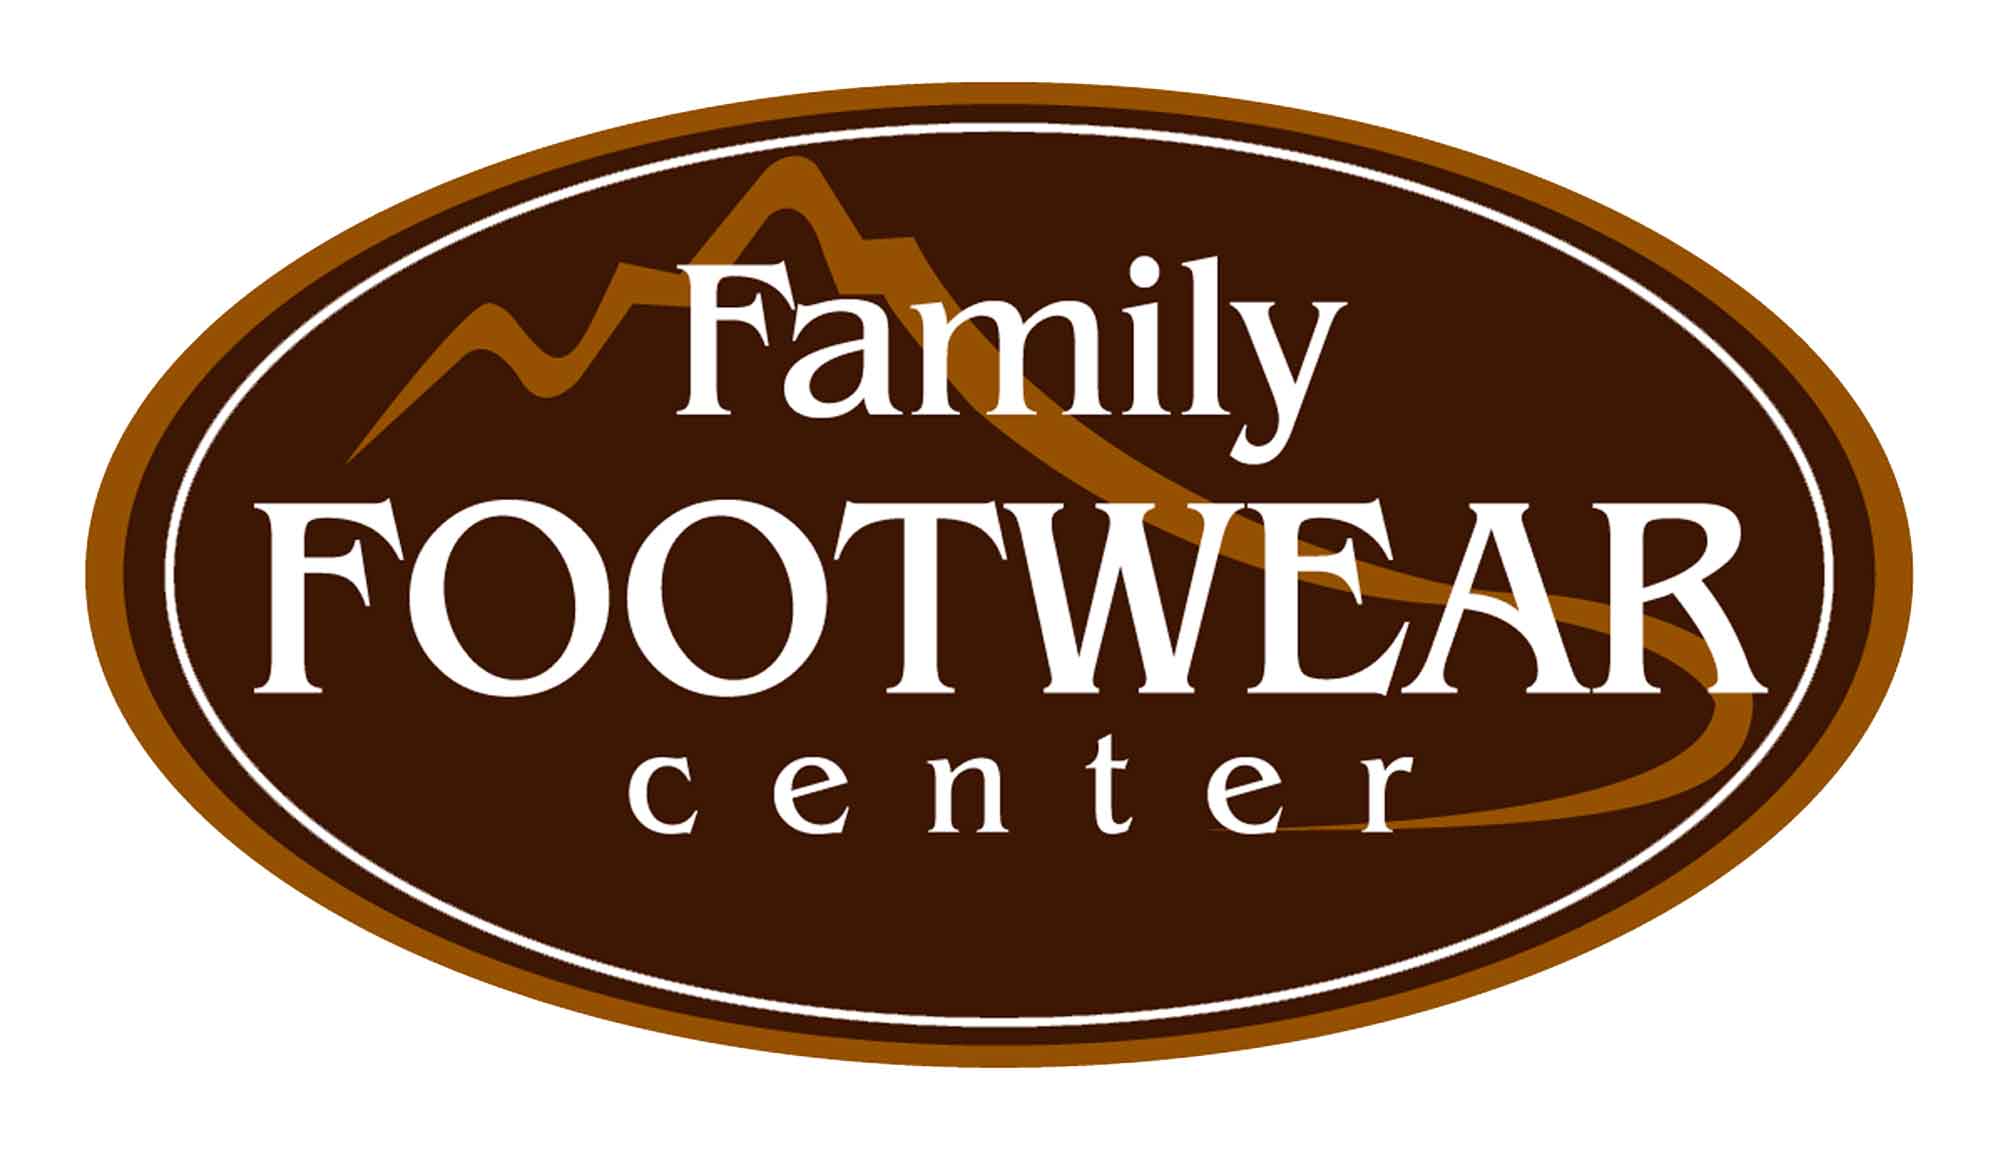 Family Footwear Center - Your American Work Boot Headquarters!